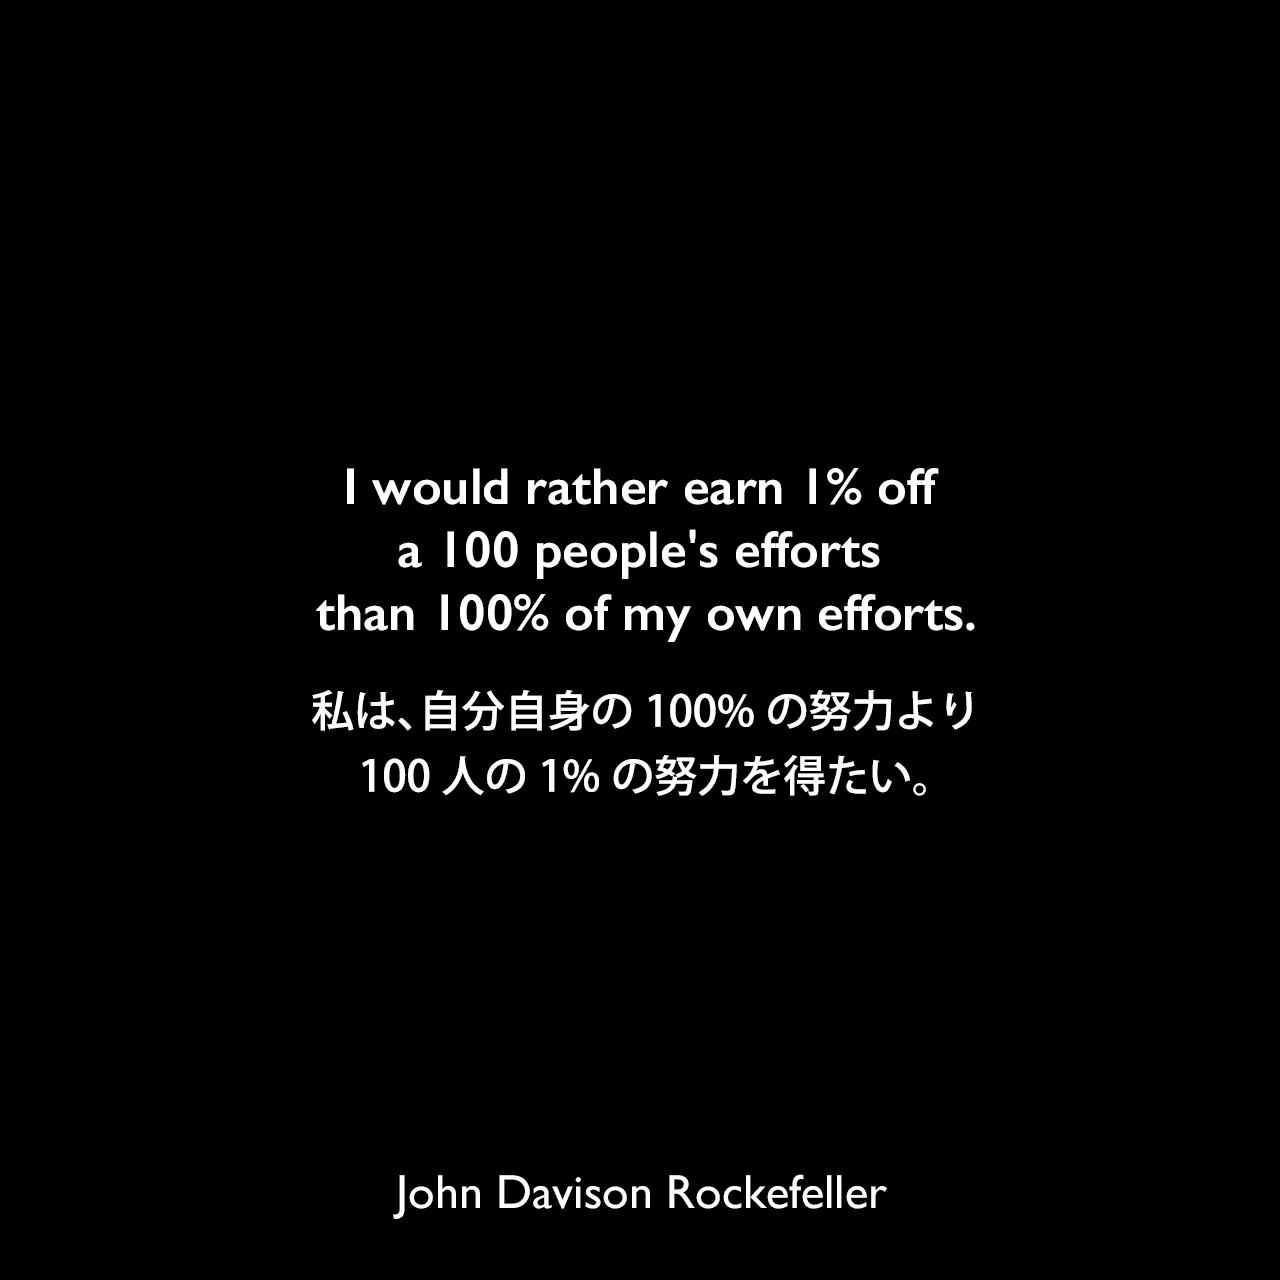 I would rather earn 1% off a 100 people’s efforts than 100% of my own efforts.私は、自分自身の100%の努力より100人の1%の努力を得たい。